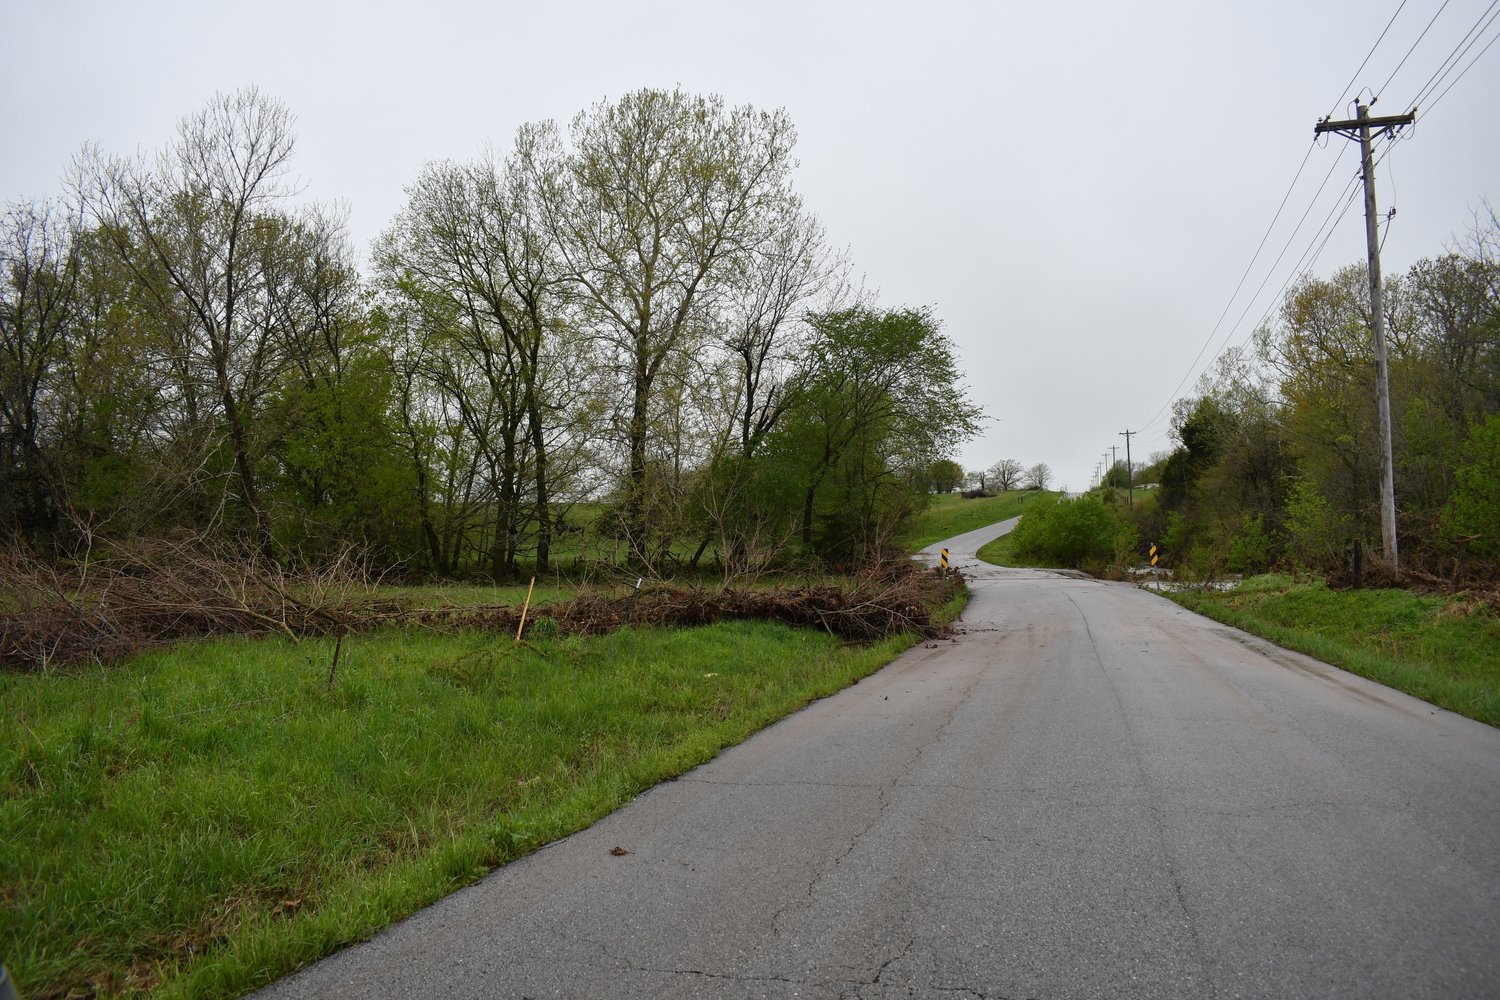 Water is still up to the bridge after having been over the road and washing a lot of debris into the ditch alongside the bridge on Mt. Gilead Road, just west of Silo Ridge Country Club.